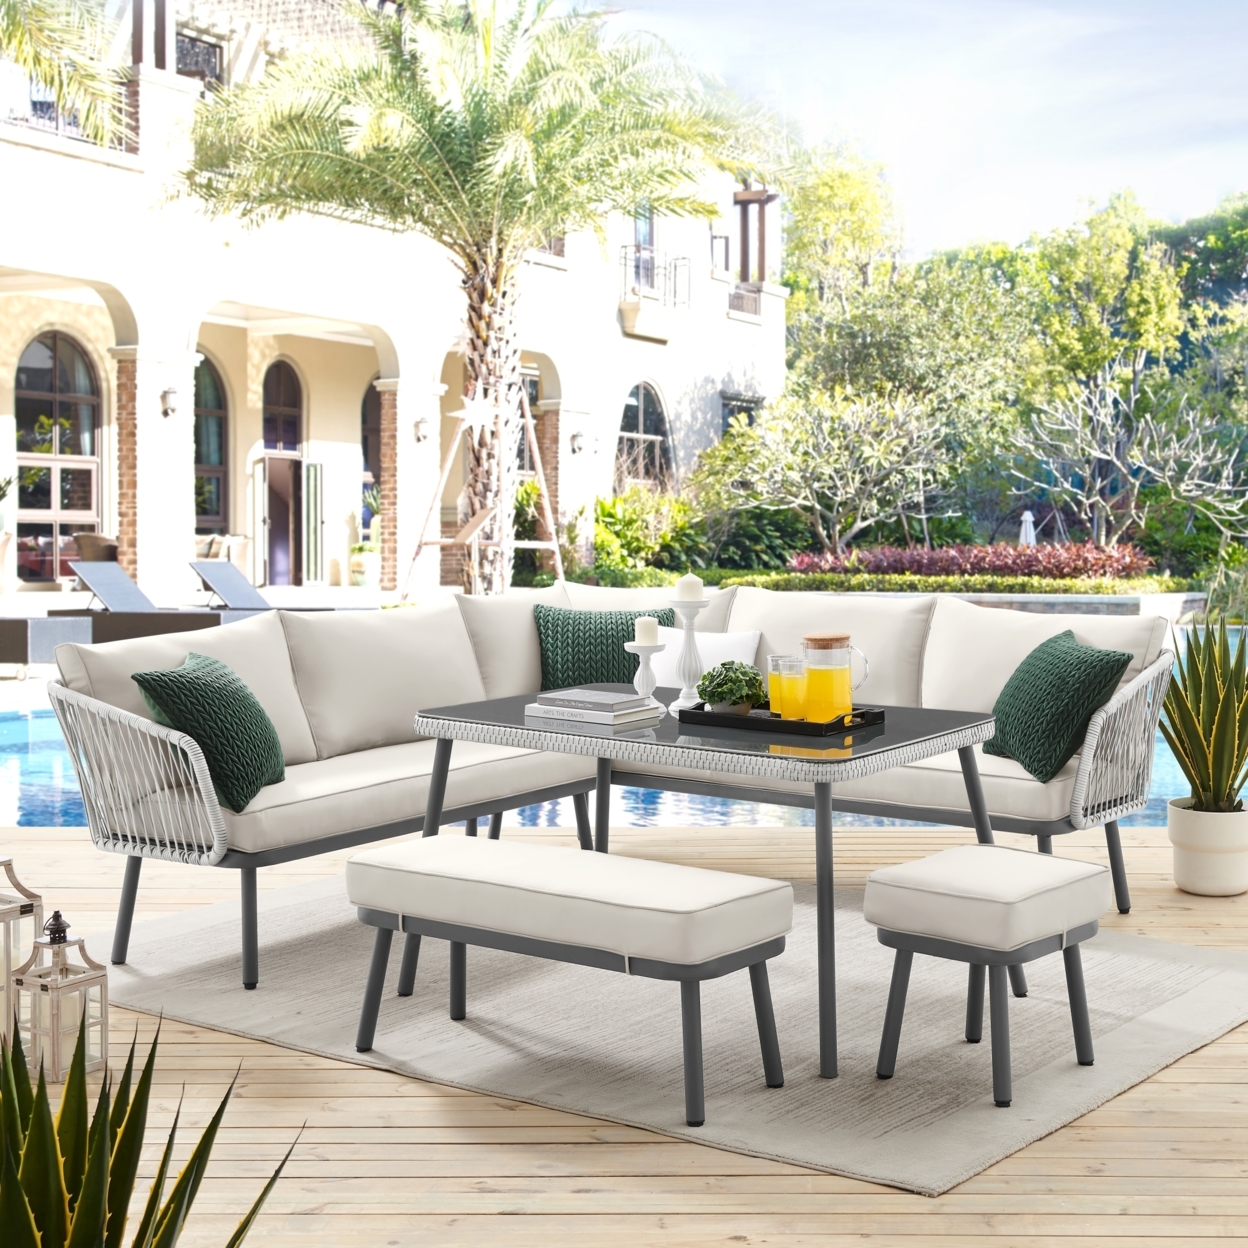 Jaycen Outdoor - Set Includes: 2 Sofas, 1 Bench, 1 Stool/Ottoman, 1 Table - Sand